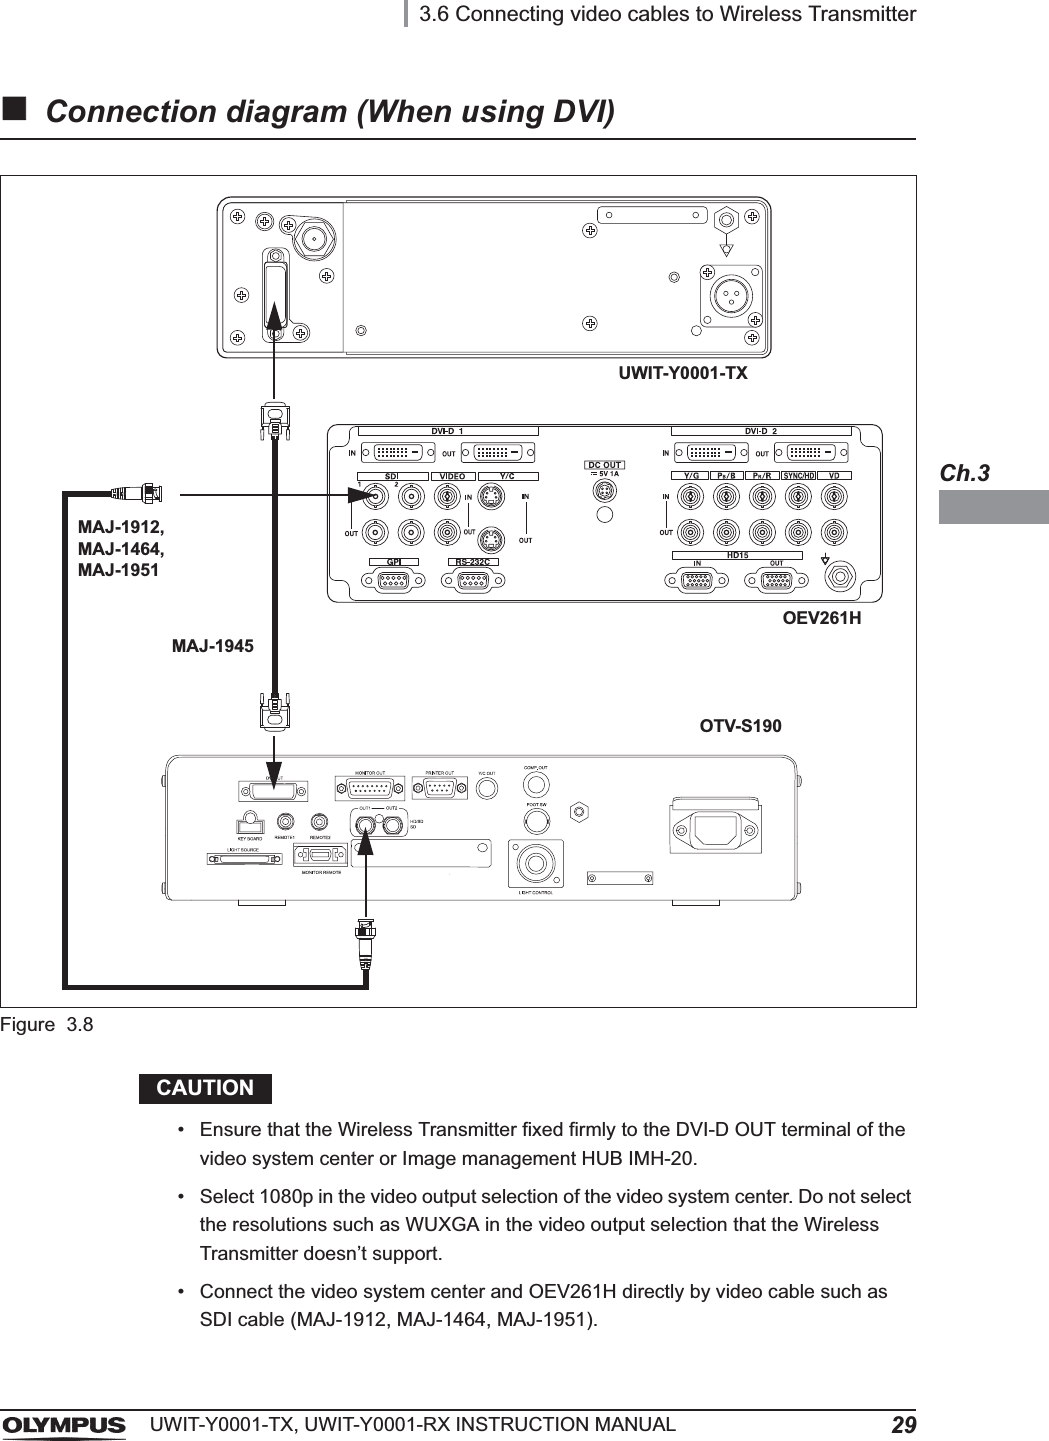 3.6 Connecting video cables to Wireless Transmitter29UWIT-Y0001-TX, UWIT-Y0001-RX INSTRUCTION MANUALCh.3Connection diagram (When using DVI)Figure 3.8CAUTION• Ensure that the Wireless Transmitter fixed firmly to the DVI-D OUT terminal of the video system center or Image management HUB IMH-20.• Select 1080p in the video output selection of the video system center. Do not select the resolutions such as WUXGA in the video output selection that the Wireless Transmitter doesn’t support.• Connect the video system center and OEV261H directly by video cable such as SDI cable (MAJ-1912, MAJ-1464, MAJ-1951).UWIT-Y0001-TXMAJ-1945OEV261HOTV-S190MAJ-1912, MAJ-1464, MAJ-1951